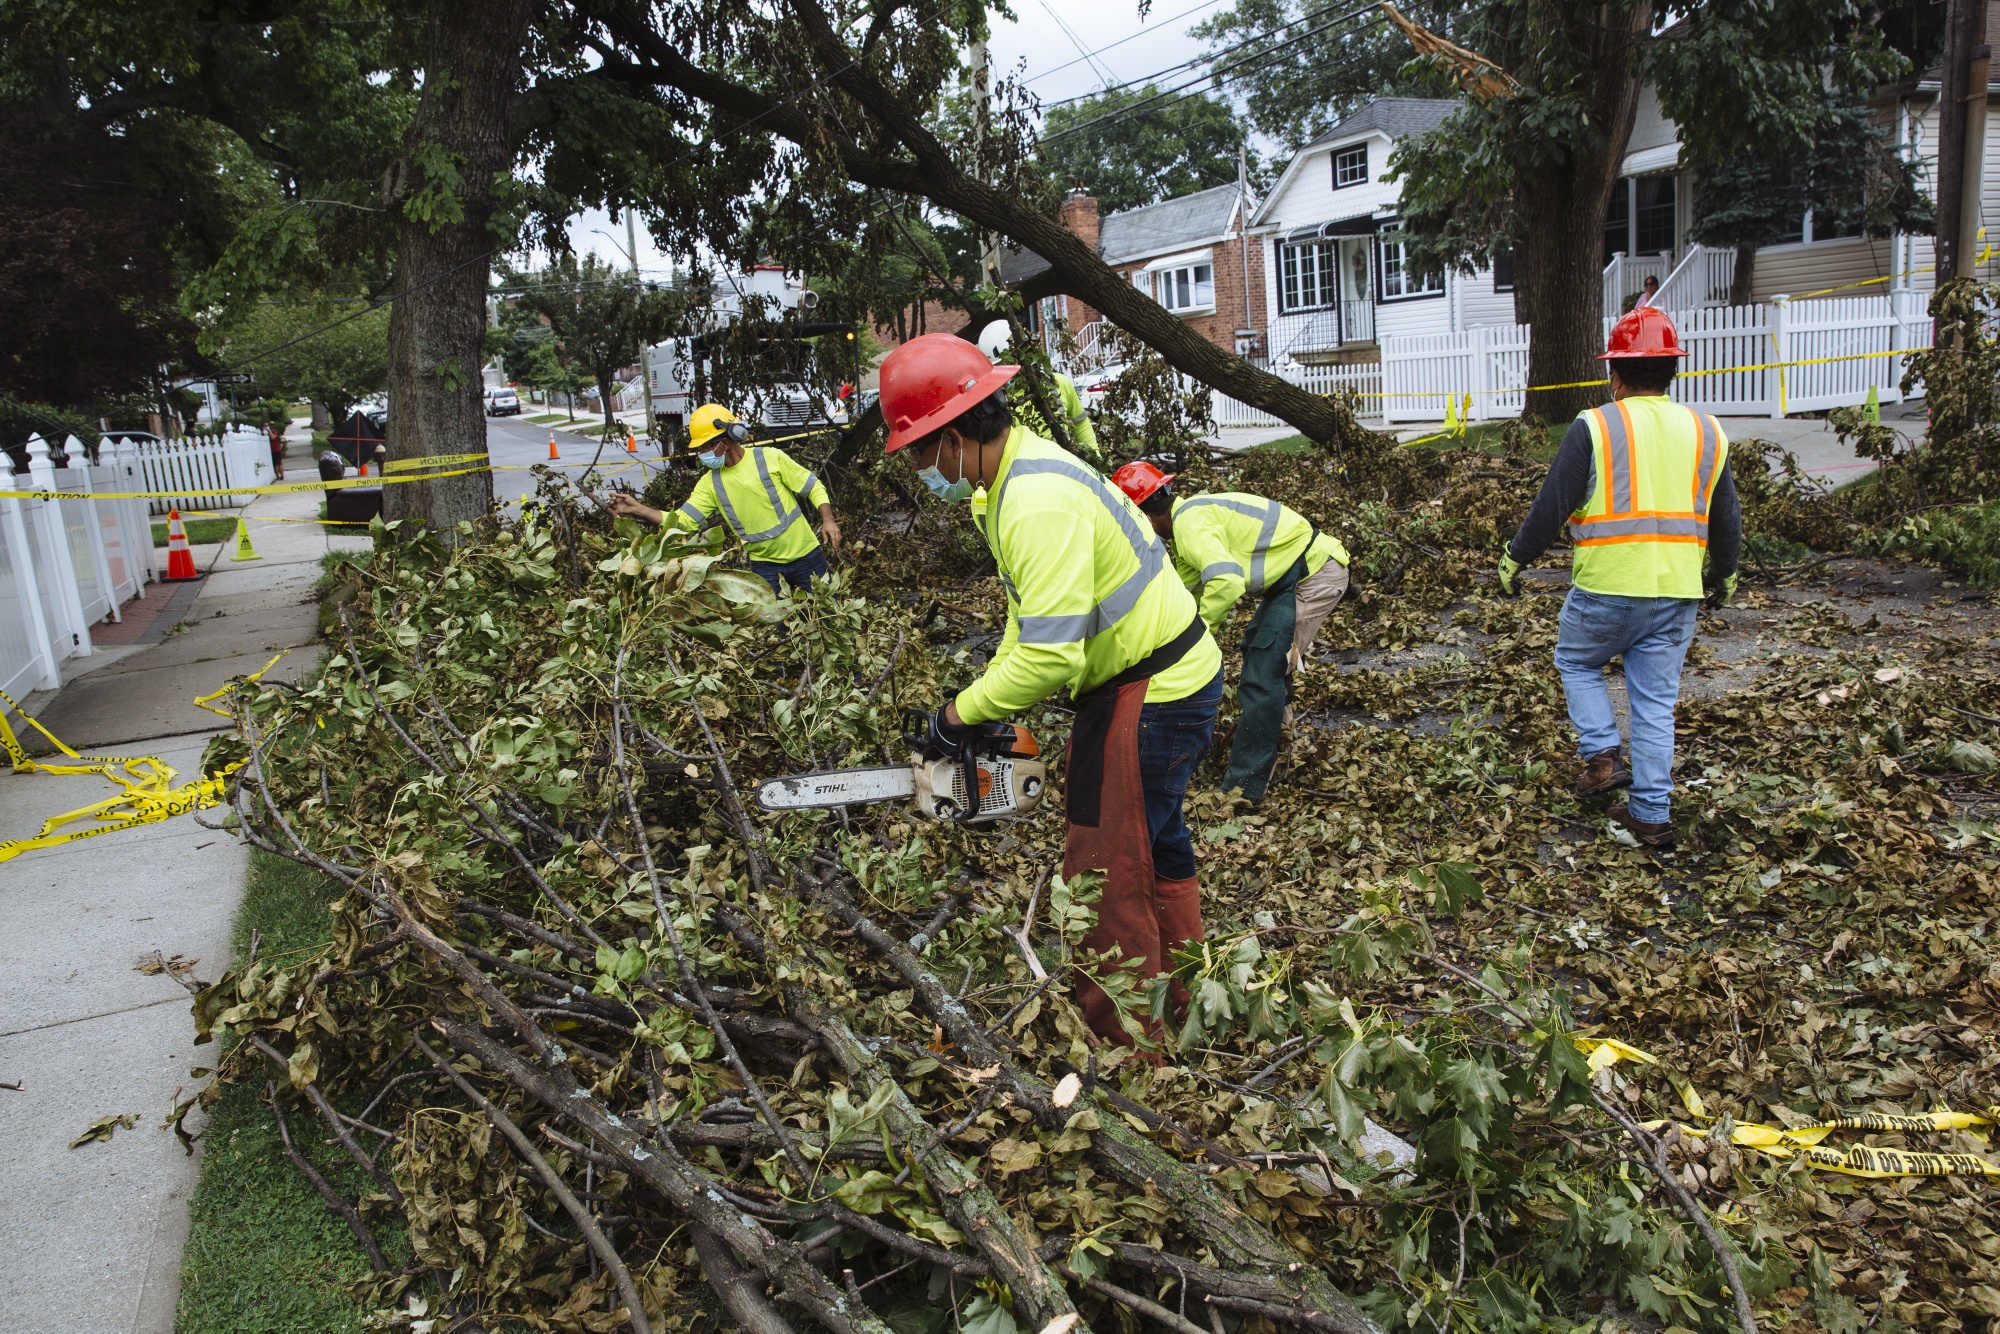 A worker uses a chainsaw to clear debris from a fallen tree in Queens, New York on Aug. 7.